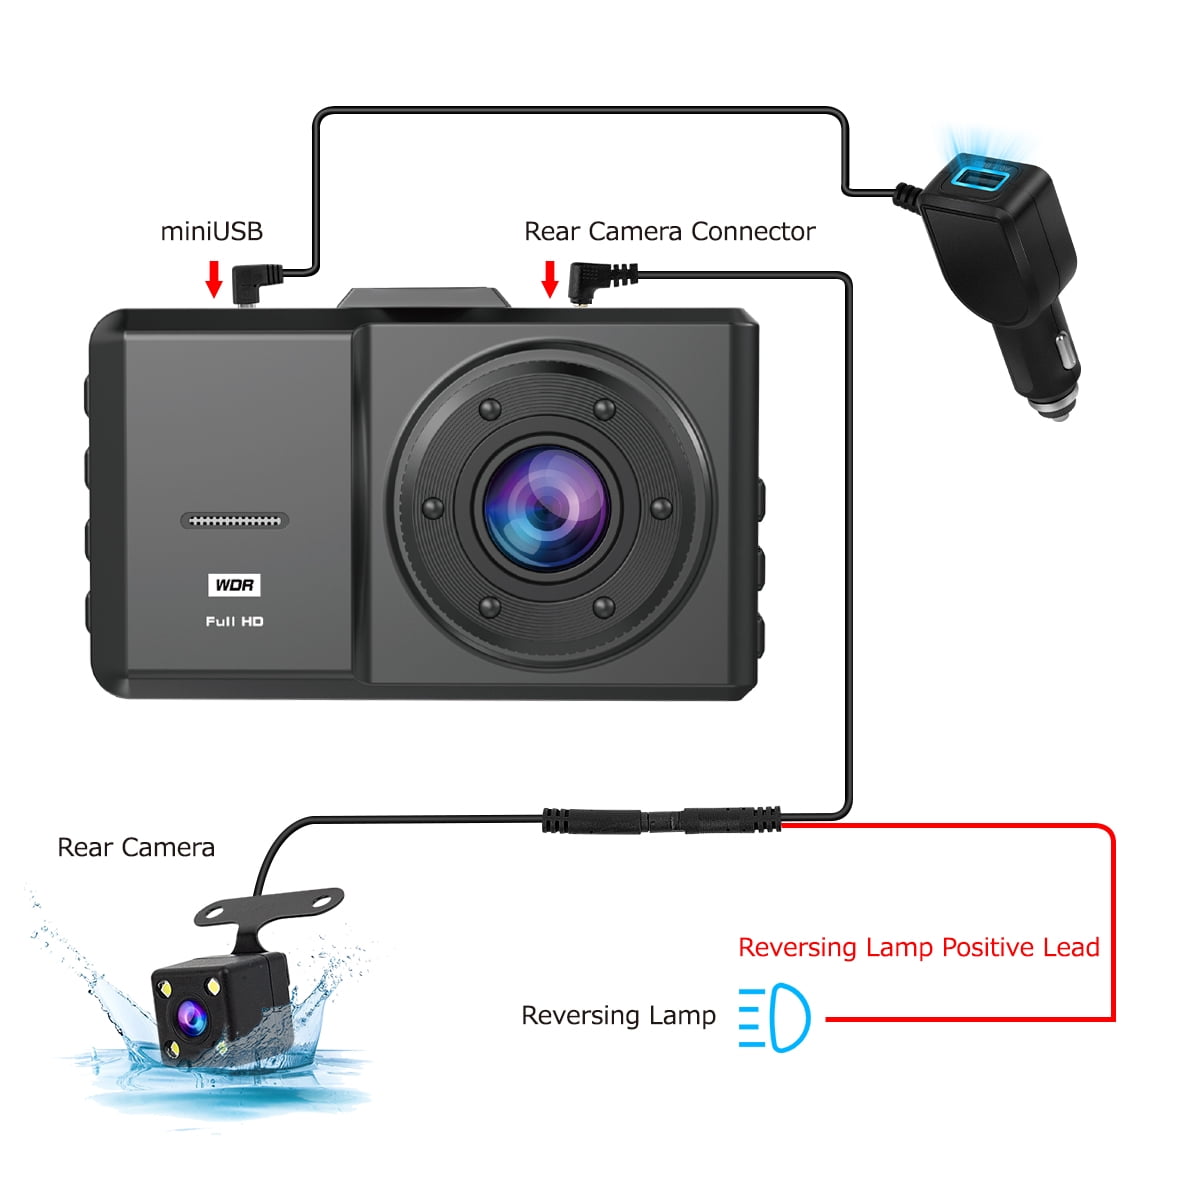 SPADE DC200 Dual Dash Cam Front and Rear 1296p Full HD Backup